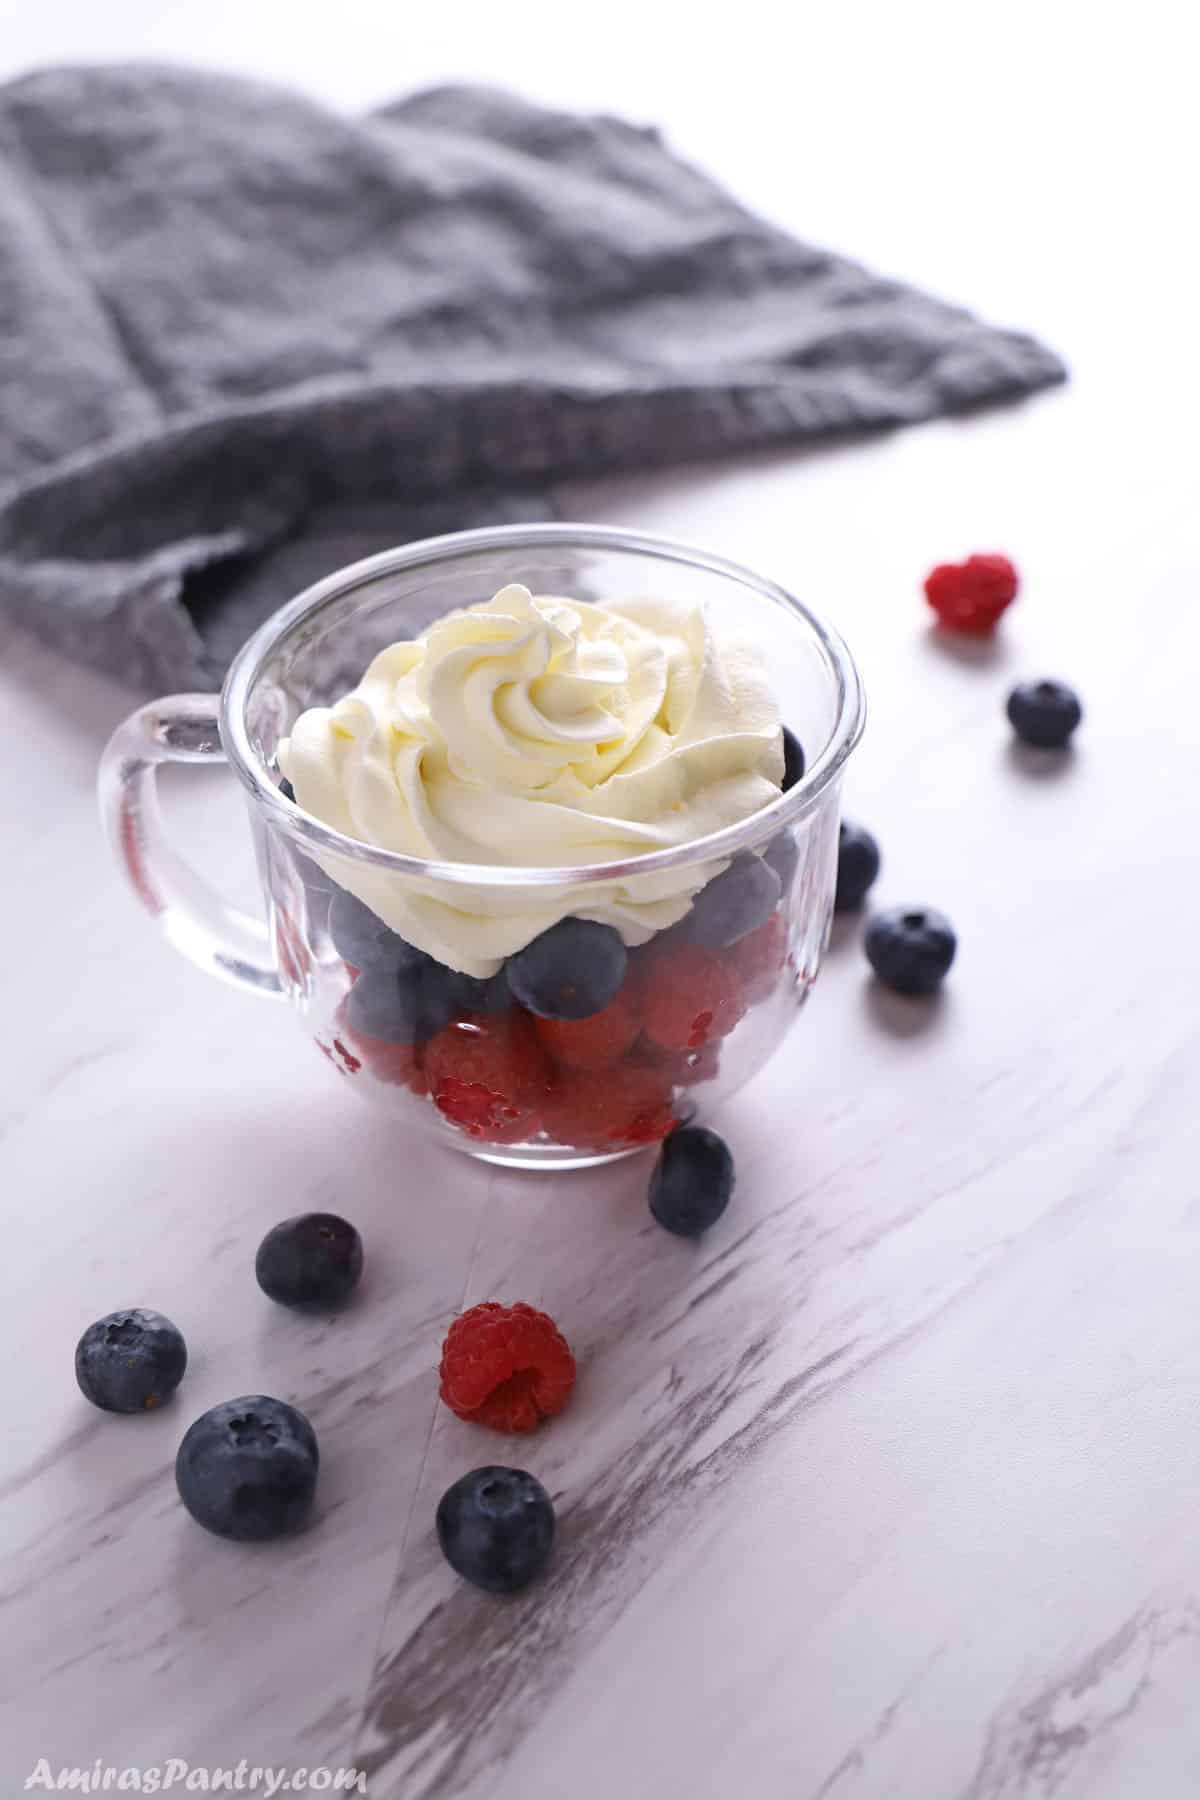 A cup pf berries topped with chantilly cream.